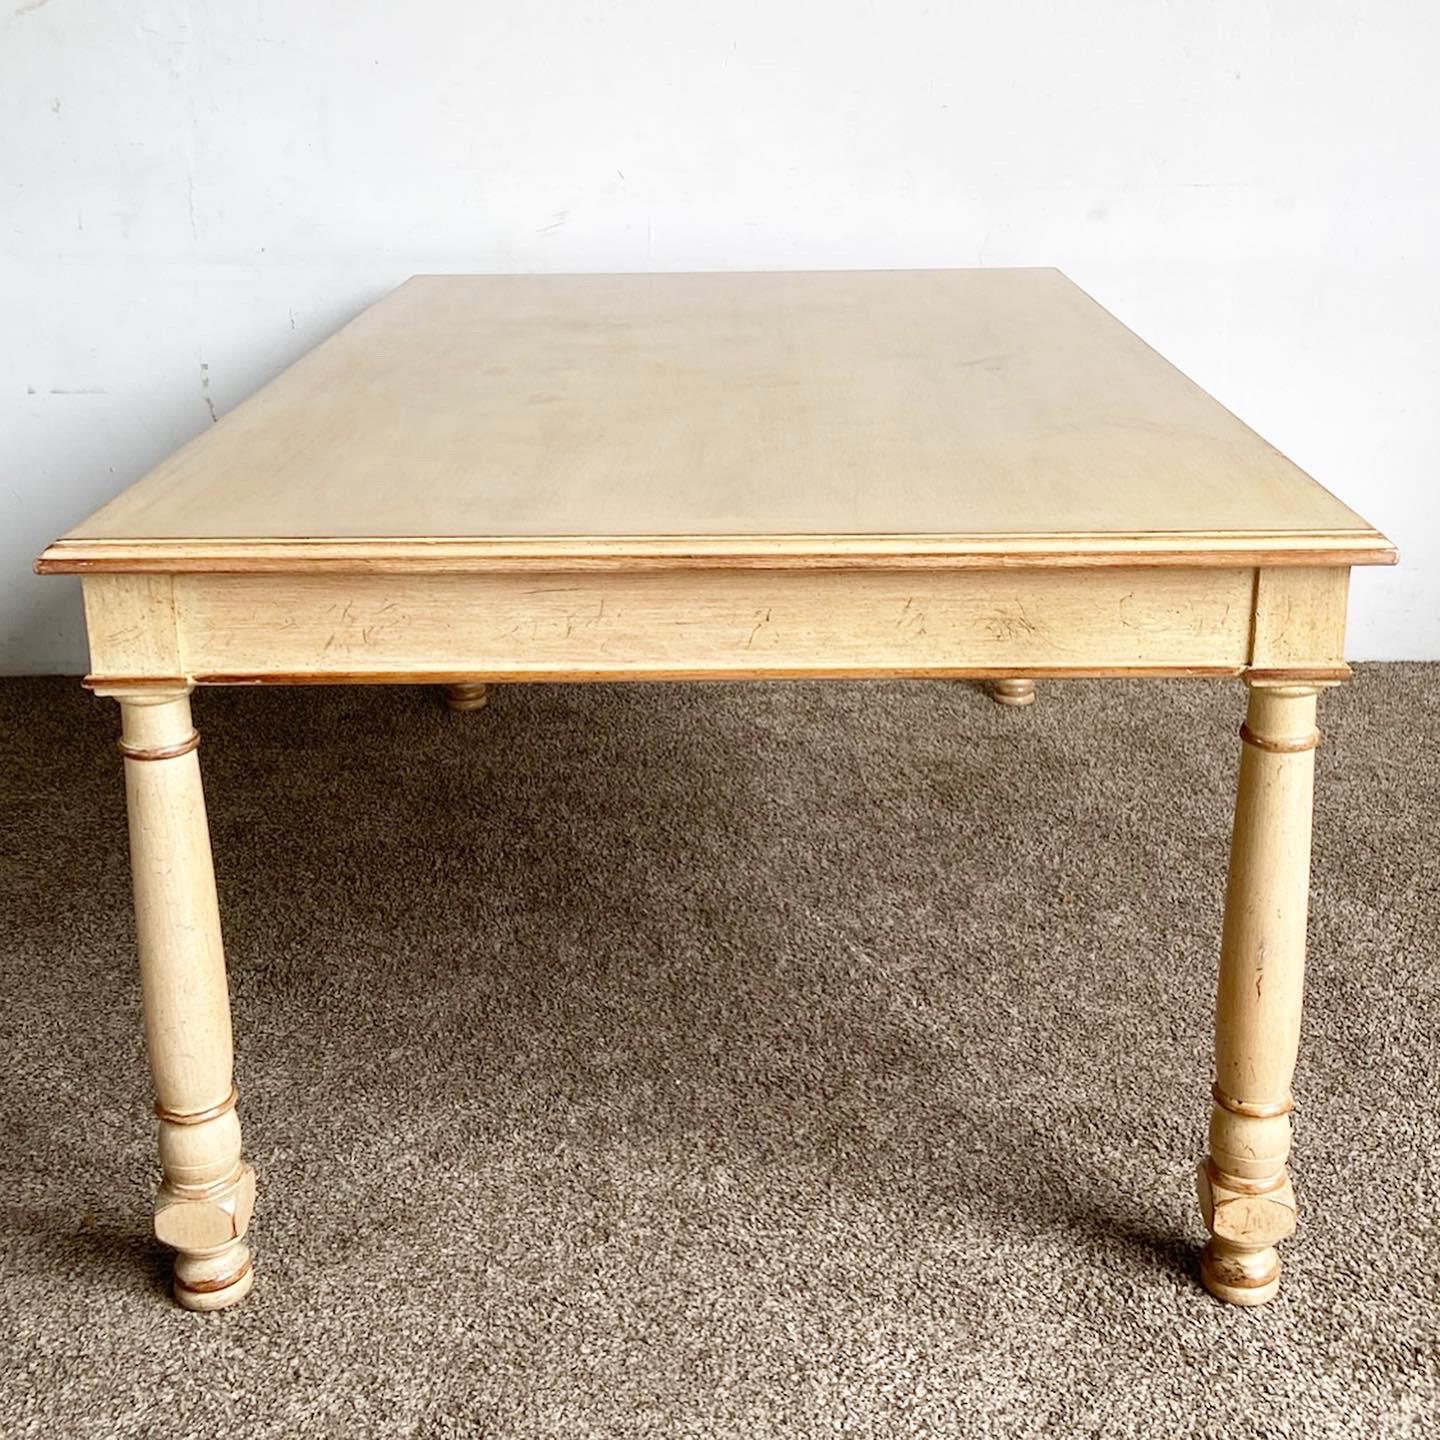 Late 20th Century Rustic Regency Chic White Wash Wooden Dining Table For Sale